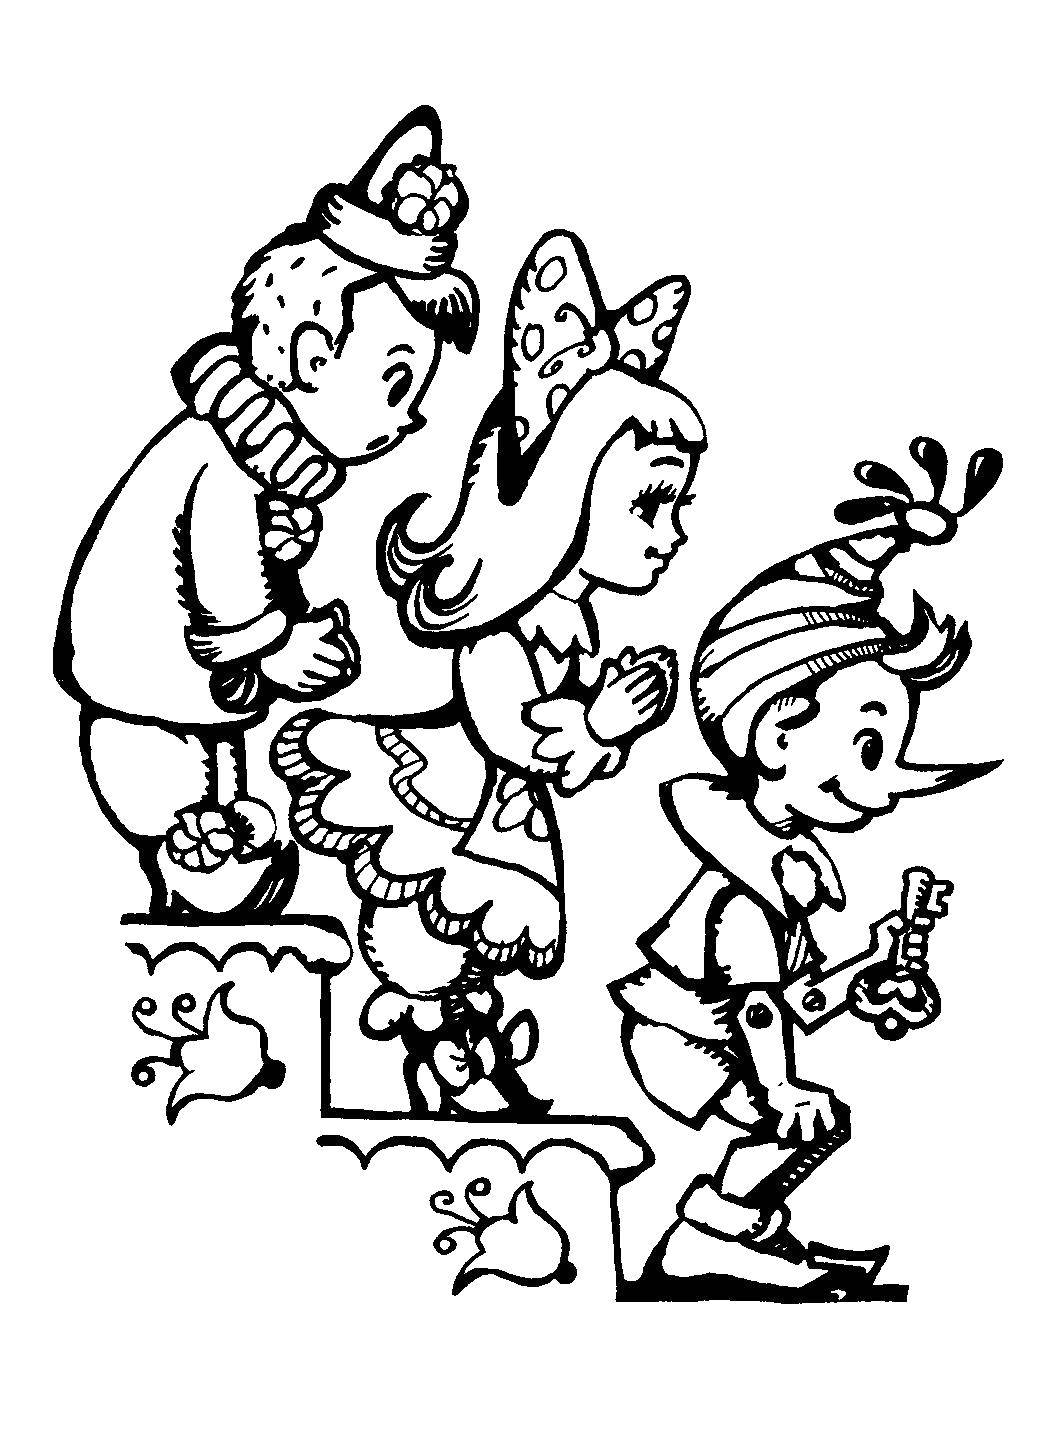 Coloring Pinocchio, Malvina and Pierrot. Category Golden key. Tags:  Pinocchio , Golden Key, cartoon.